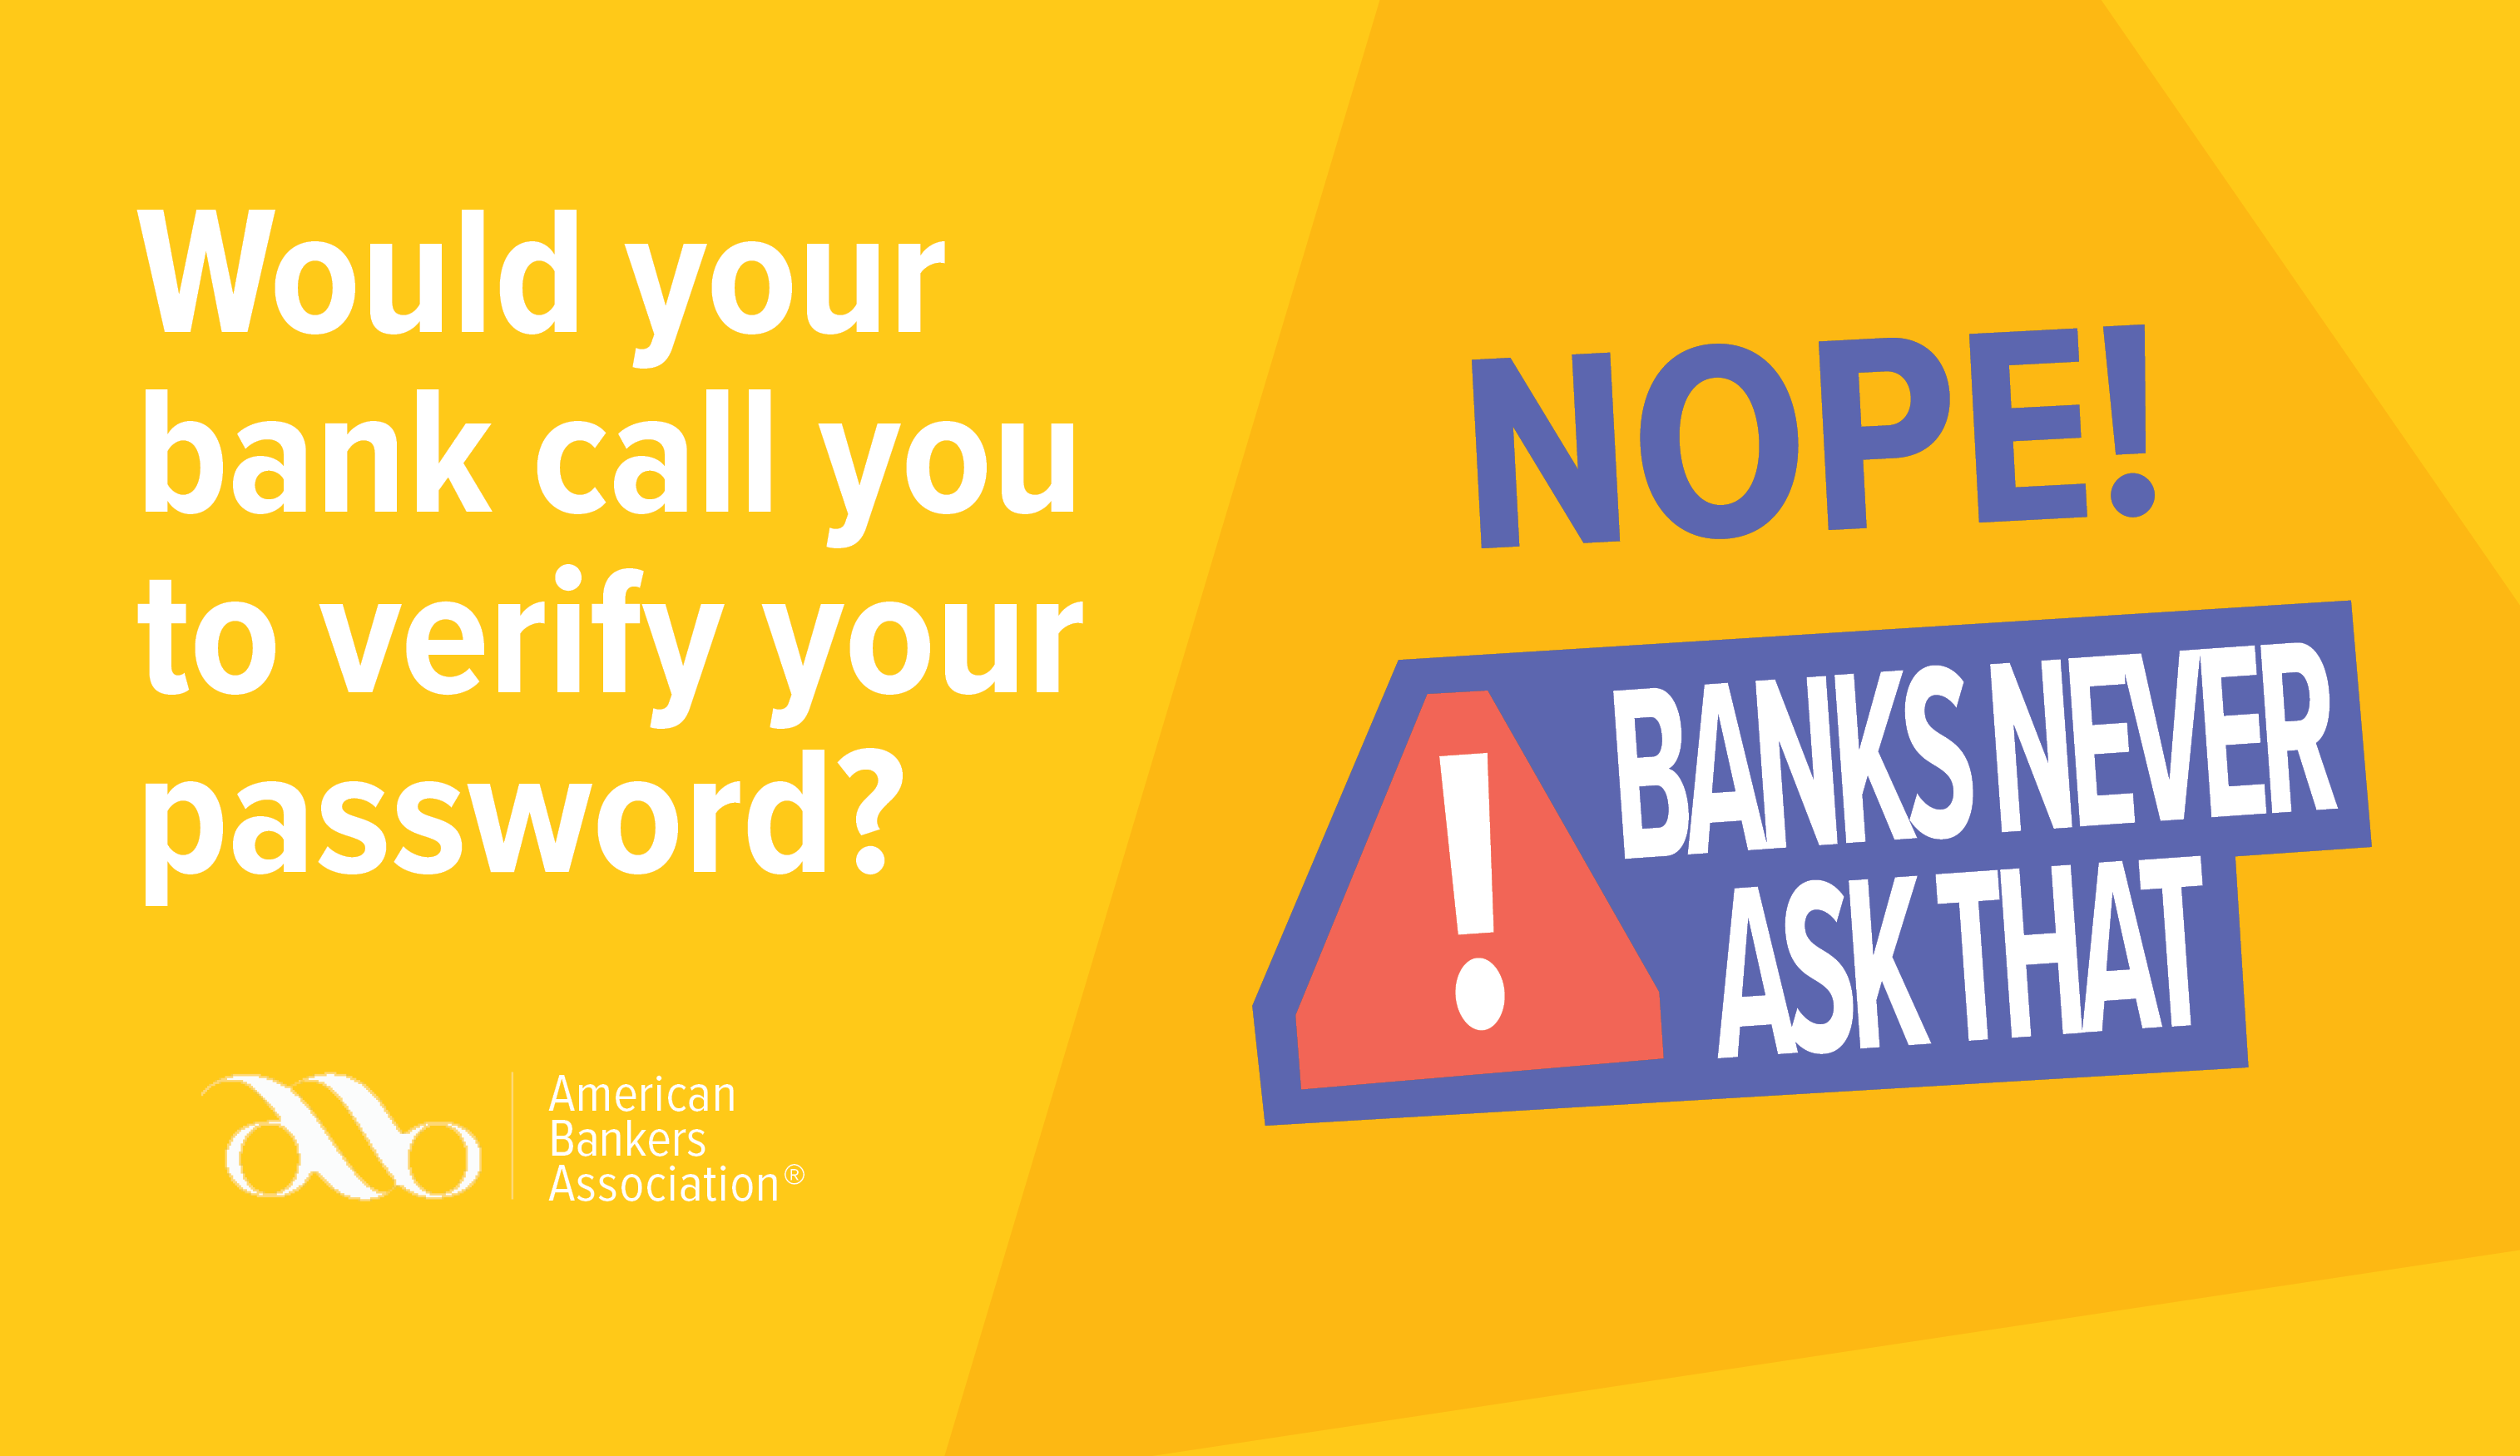 Yellow banner reads: Would your bank call you to verify your password? NOPE! Banks never ask that